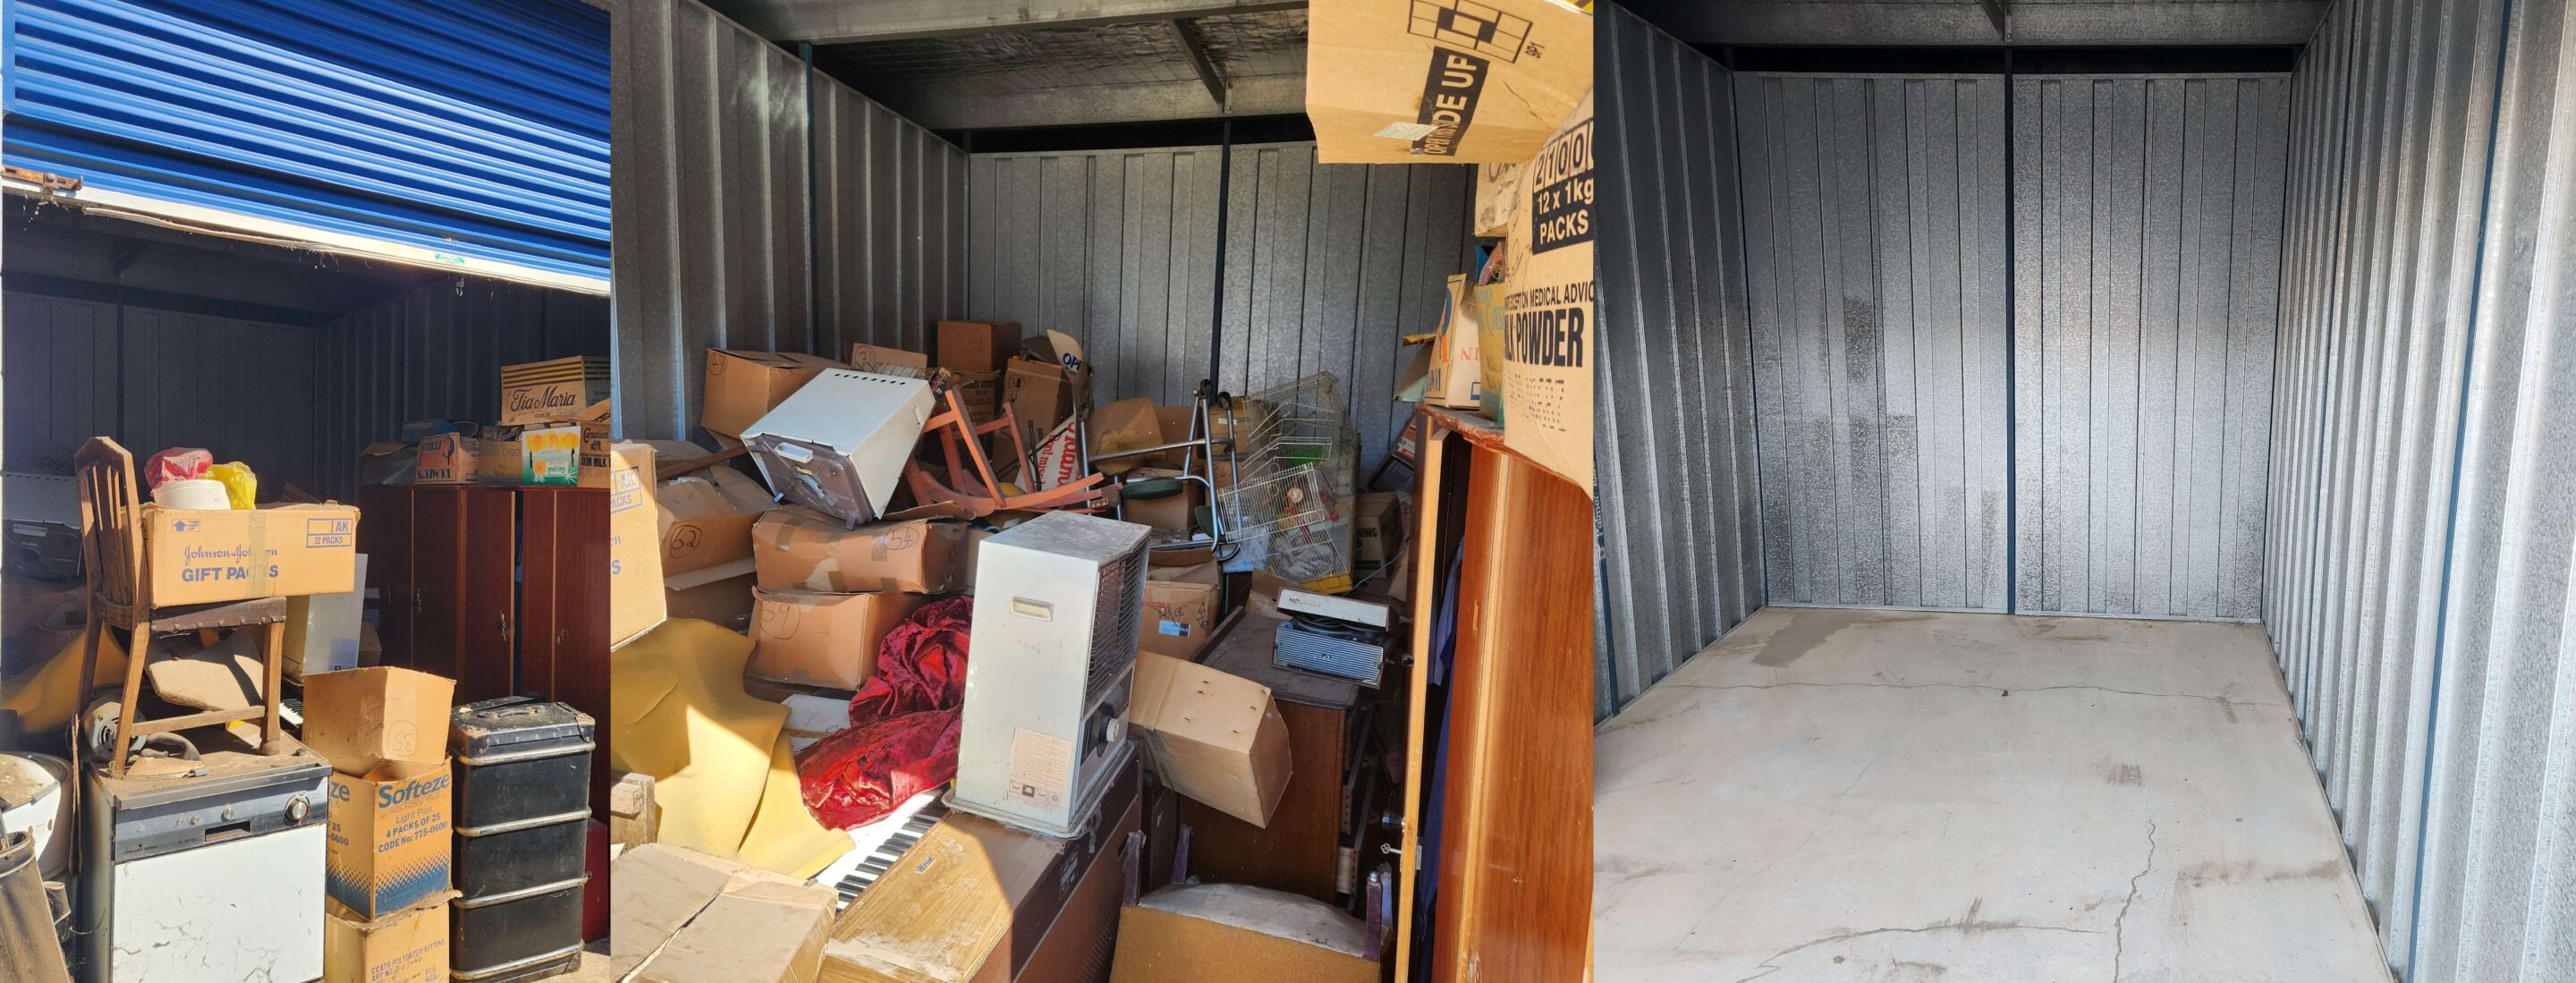 canberra rubbish removal storage unit clean out